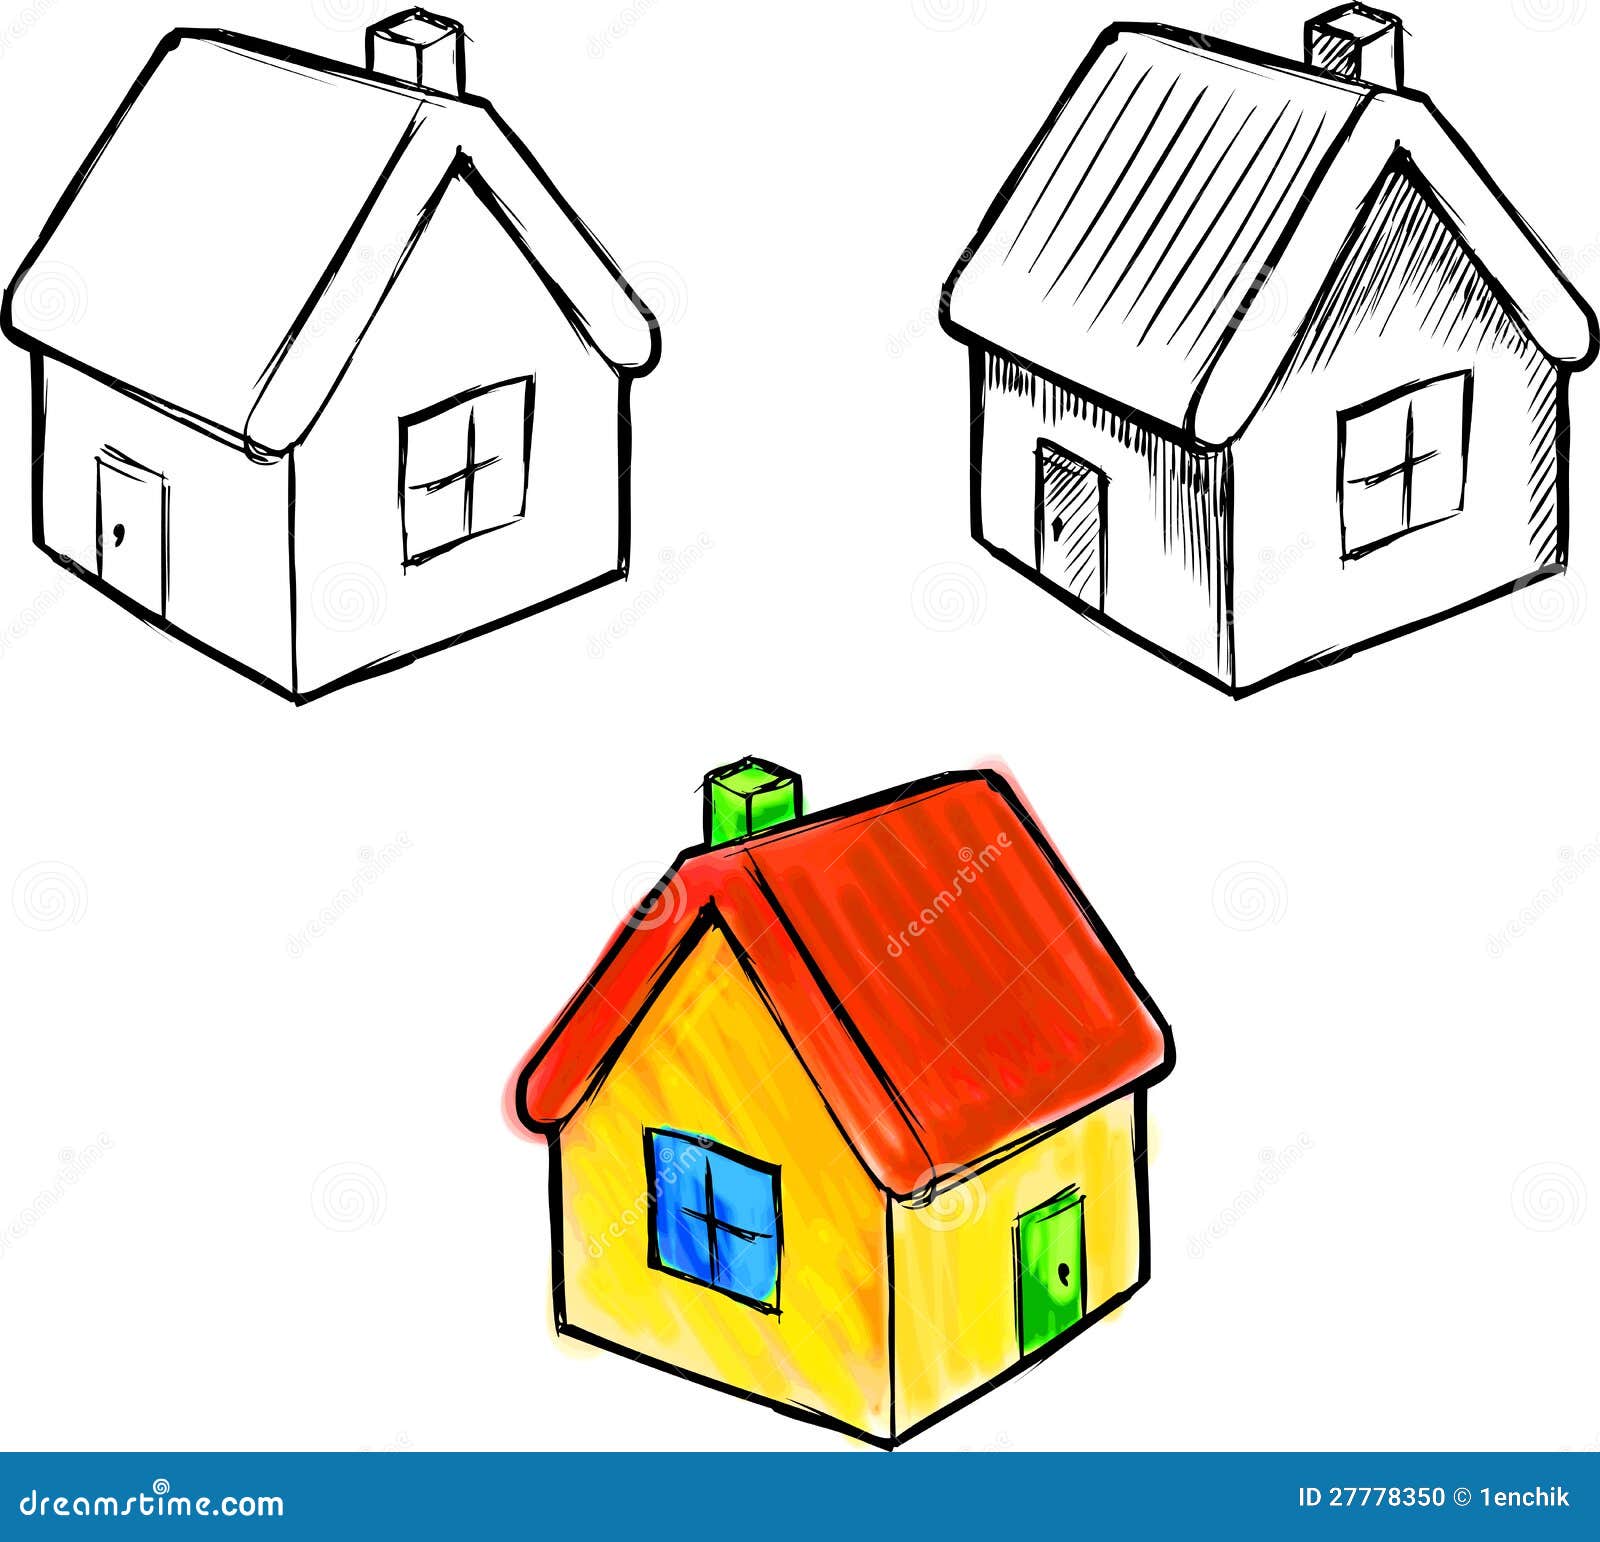 Cute Little House Vector Sketch Illustration Stock Photo